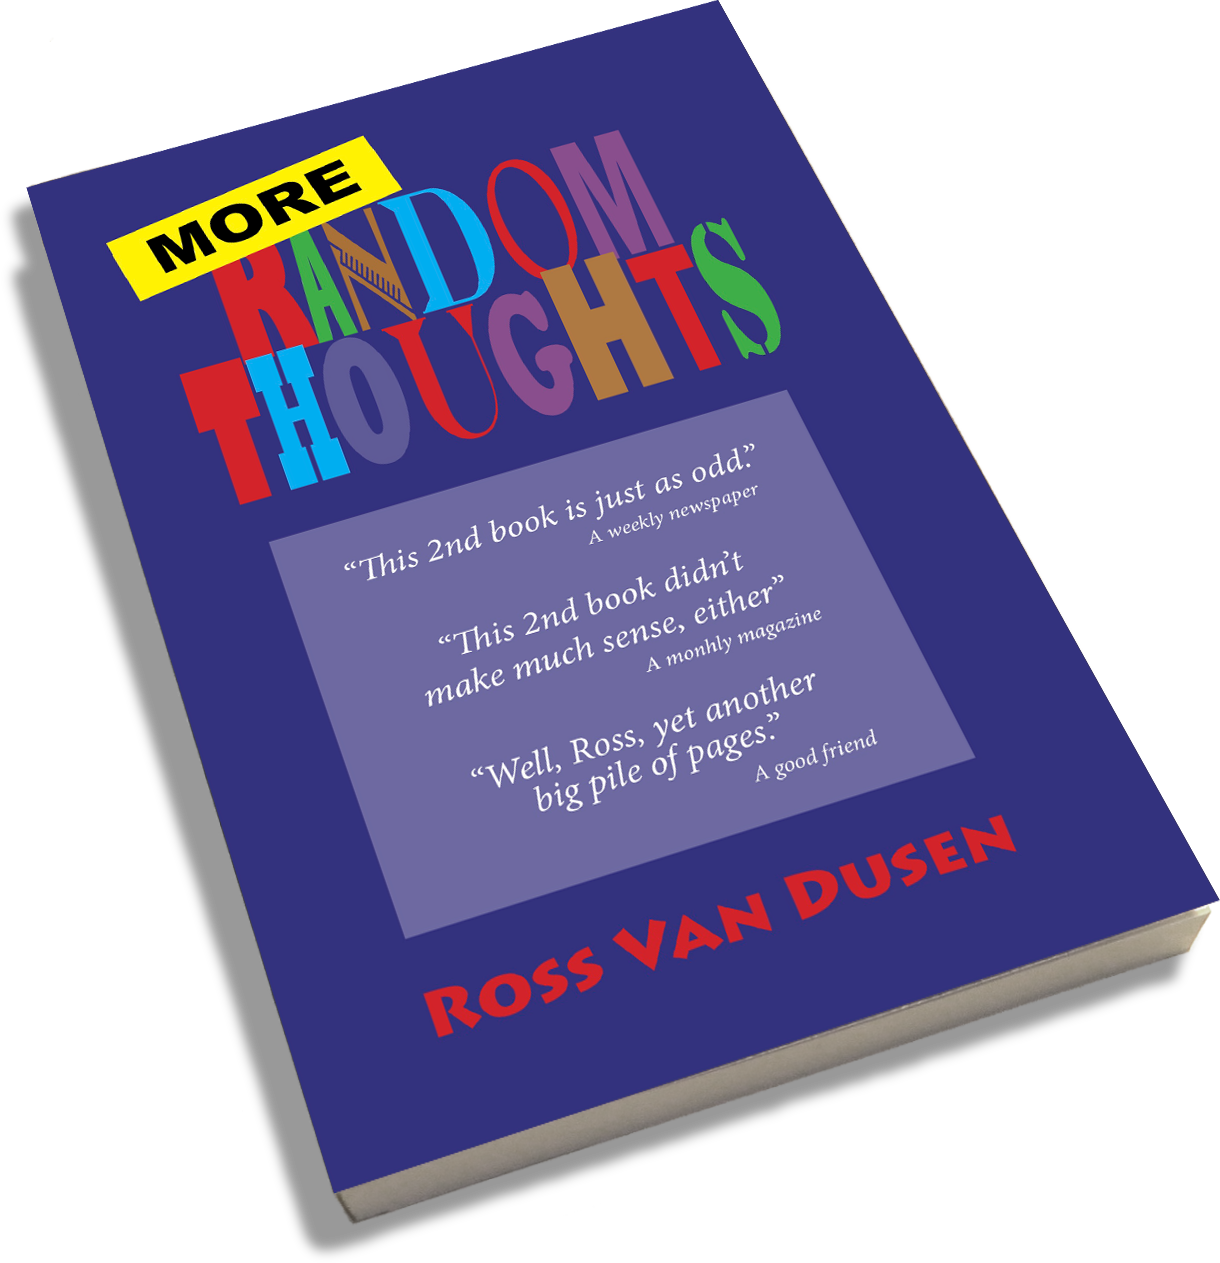 More Random Thoughts book